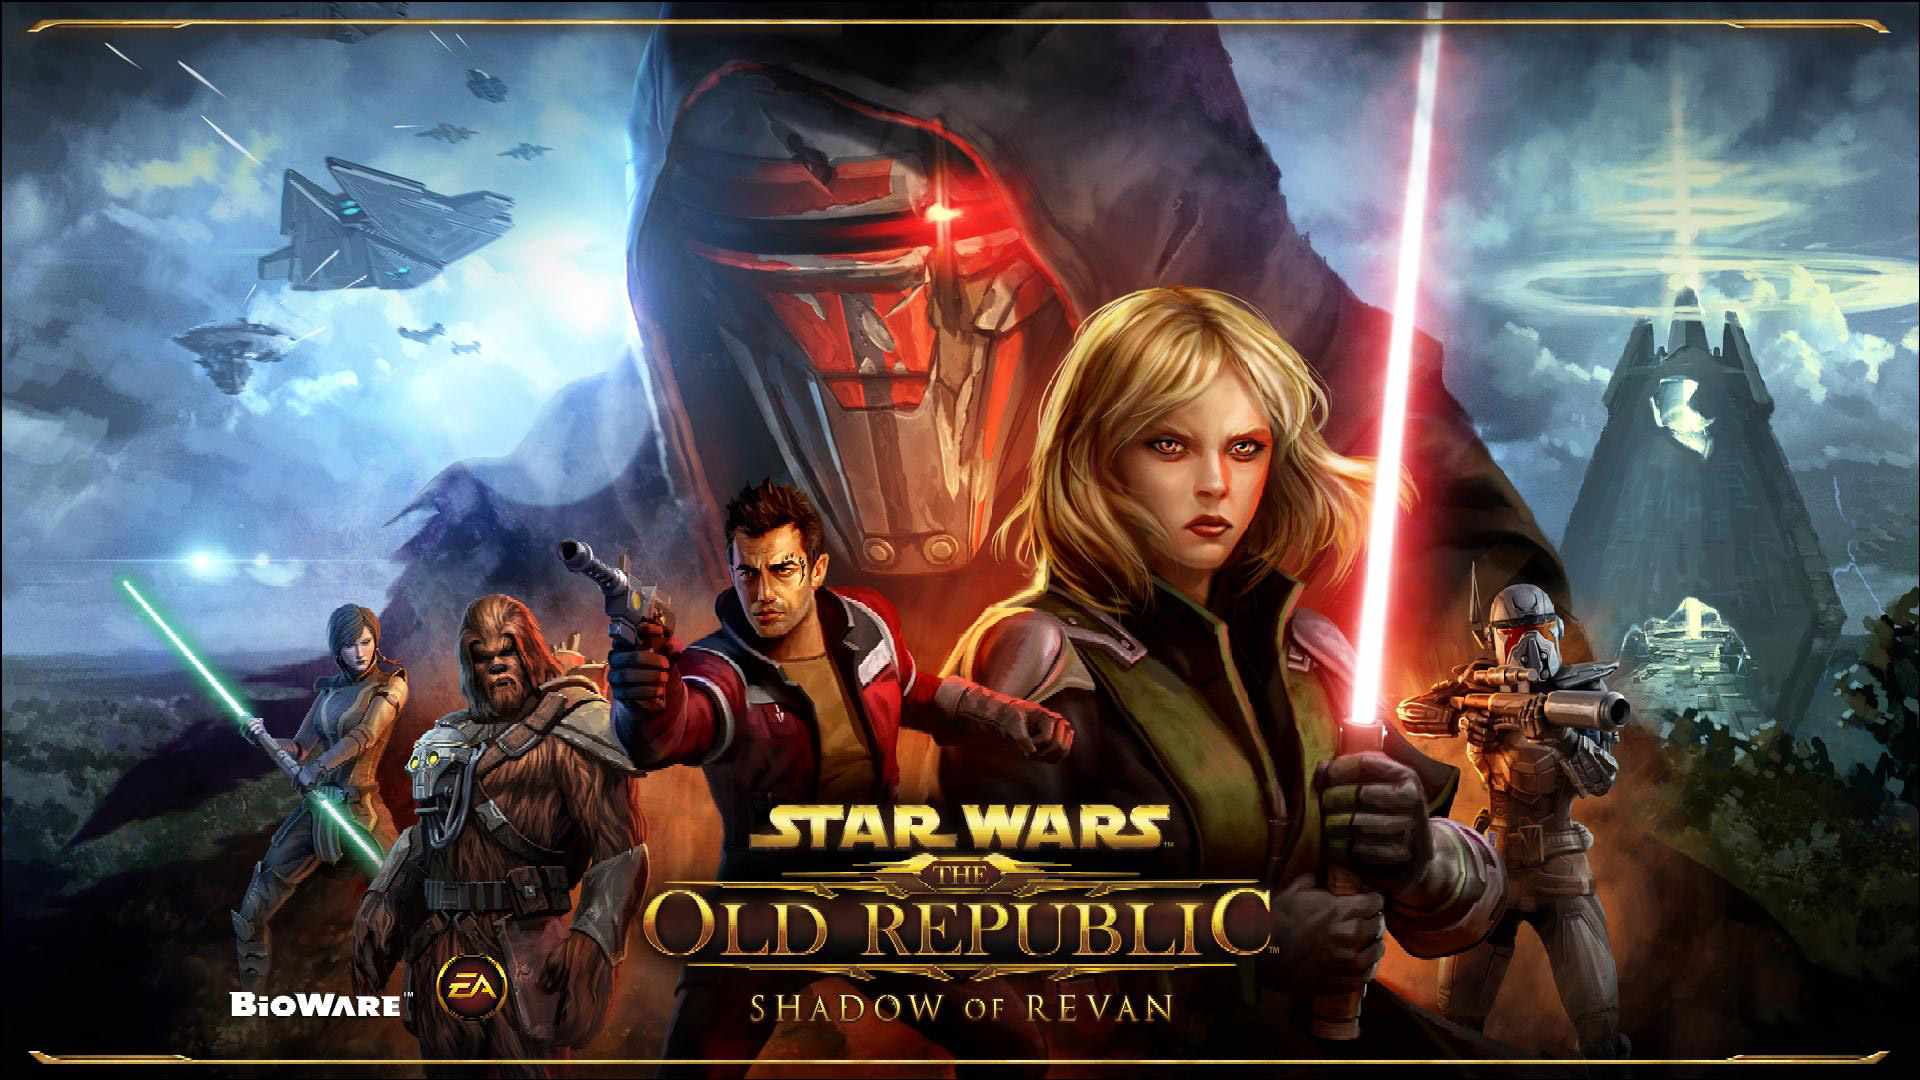 Image for Star Wars The Old Republic HD Wallpaper 1920x1080